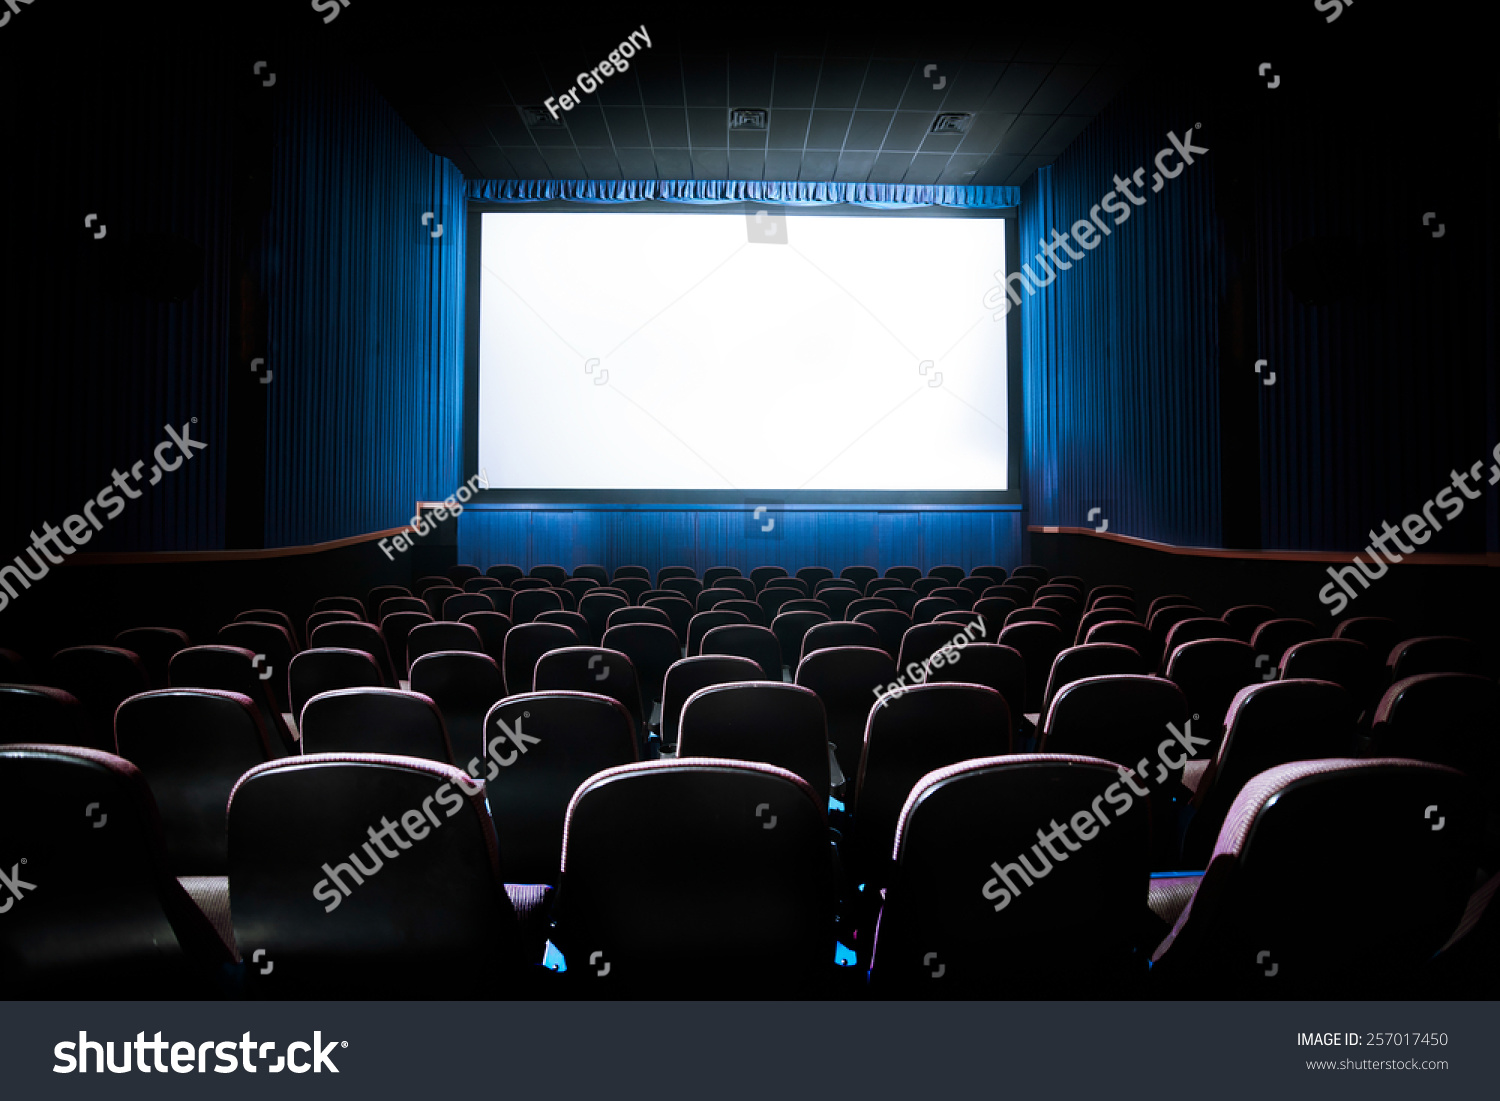 Movie Theater Blank Screen High Contrast Stock Photo Edit Now 257017450